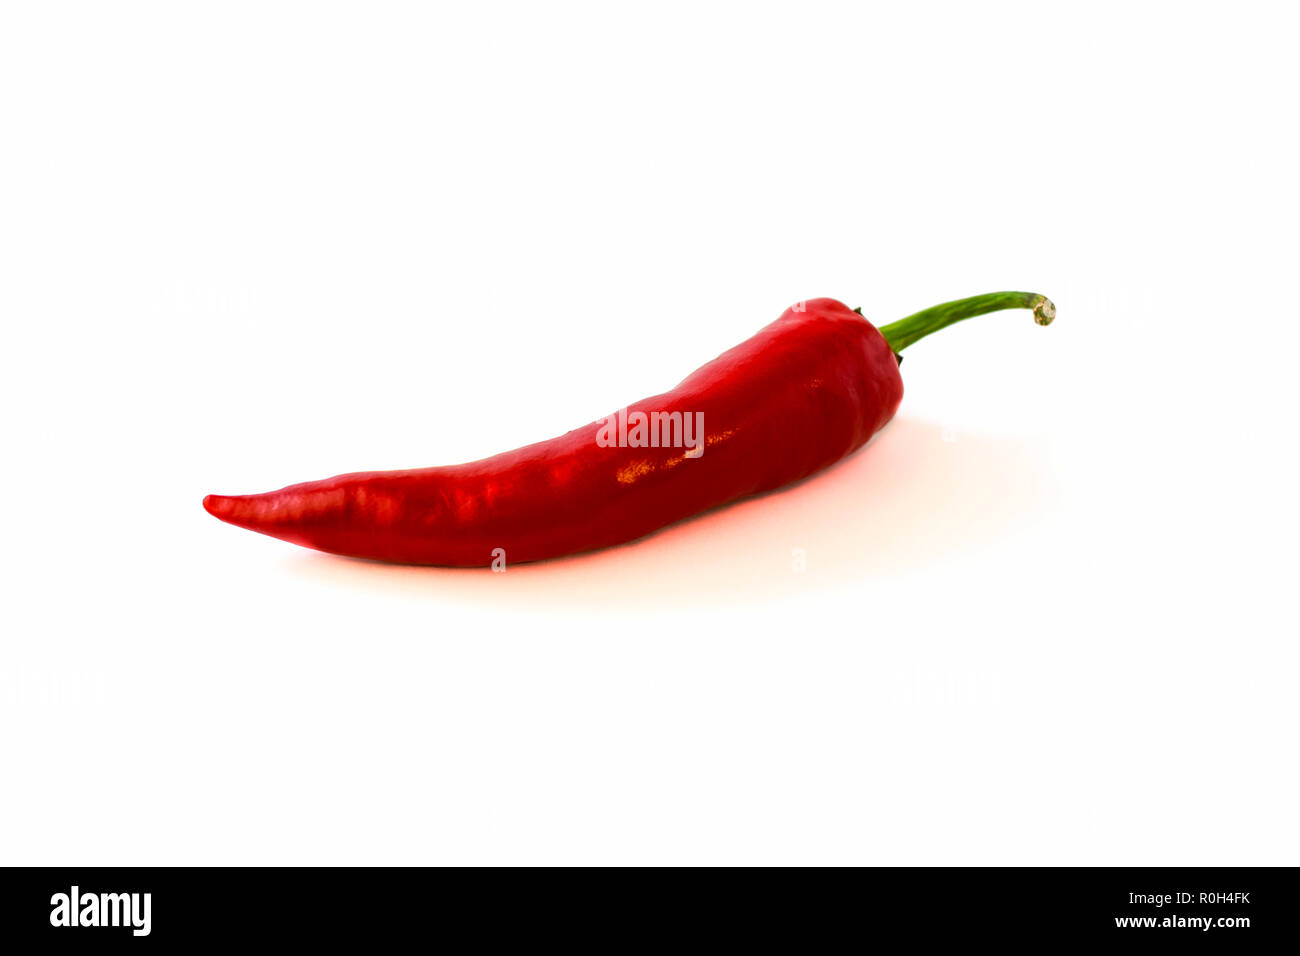 Red hot chilly pepper on the white background. Fresh spice Stock Photo